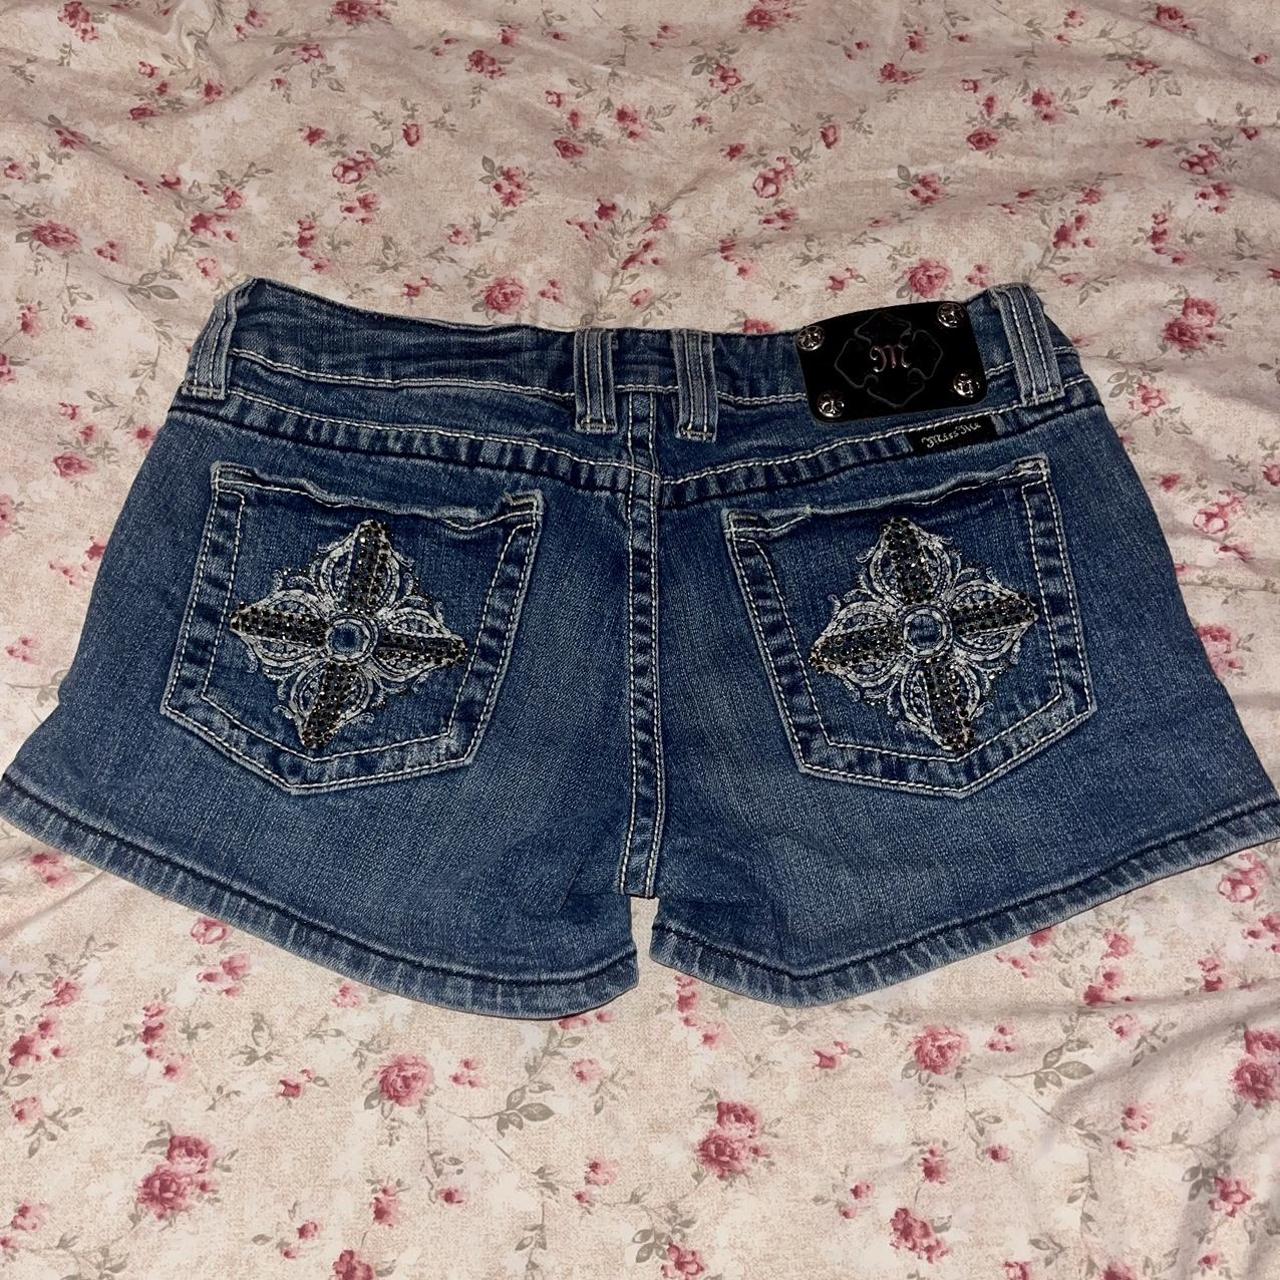 Miss Me Jean Shorts💕 Mid/Low rise i wish these... - Depop